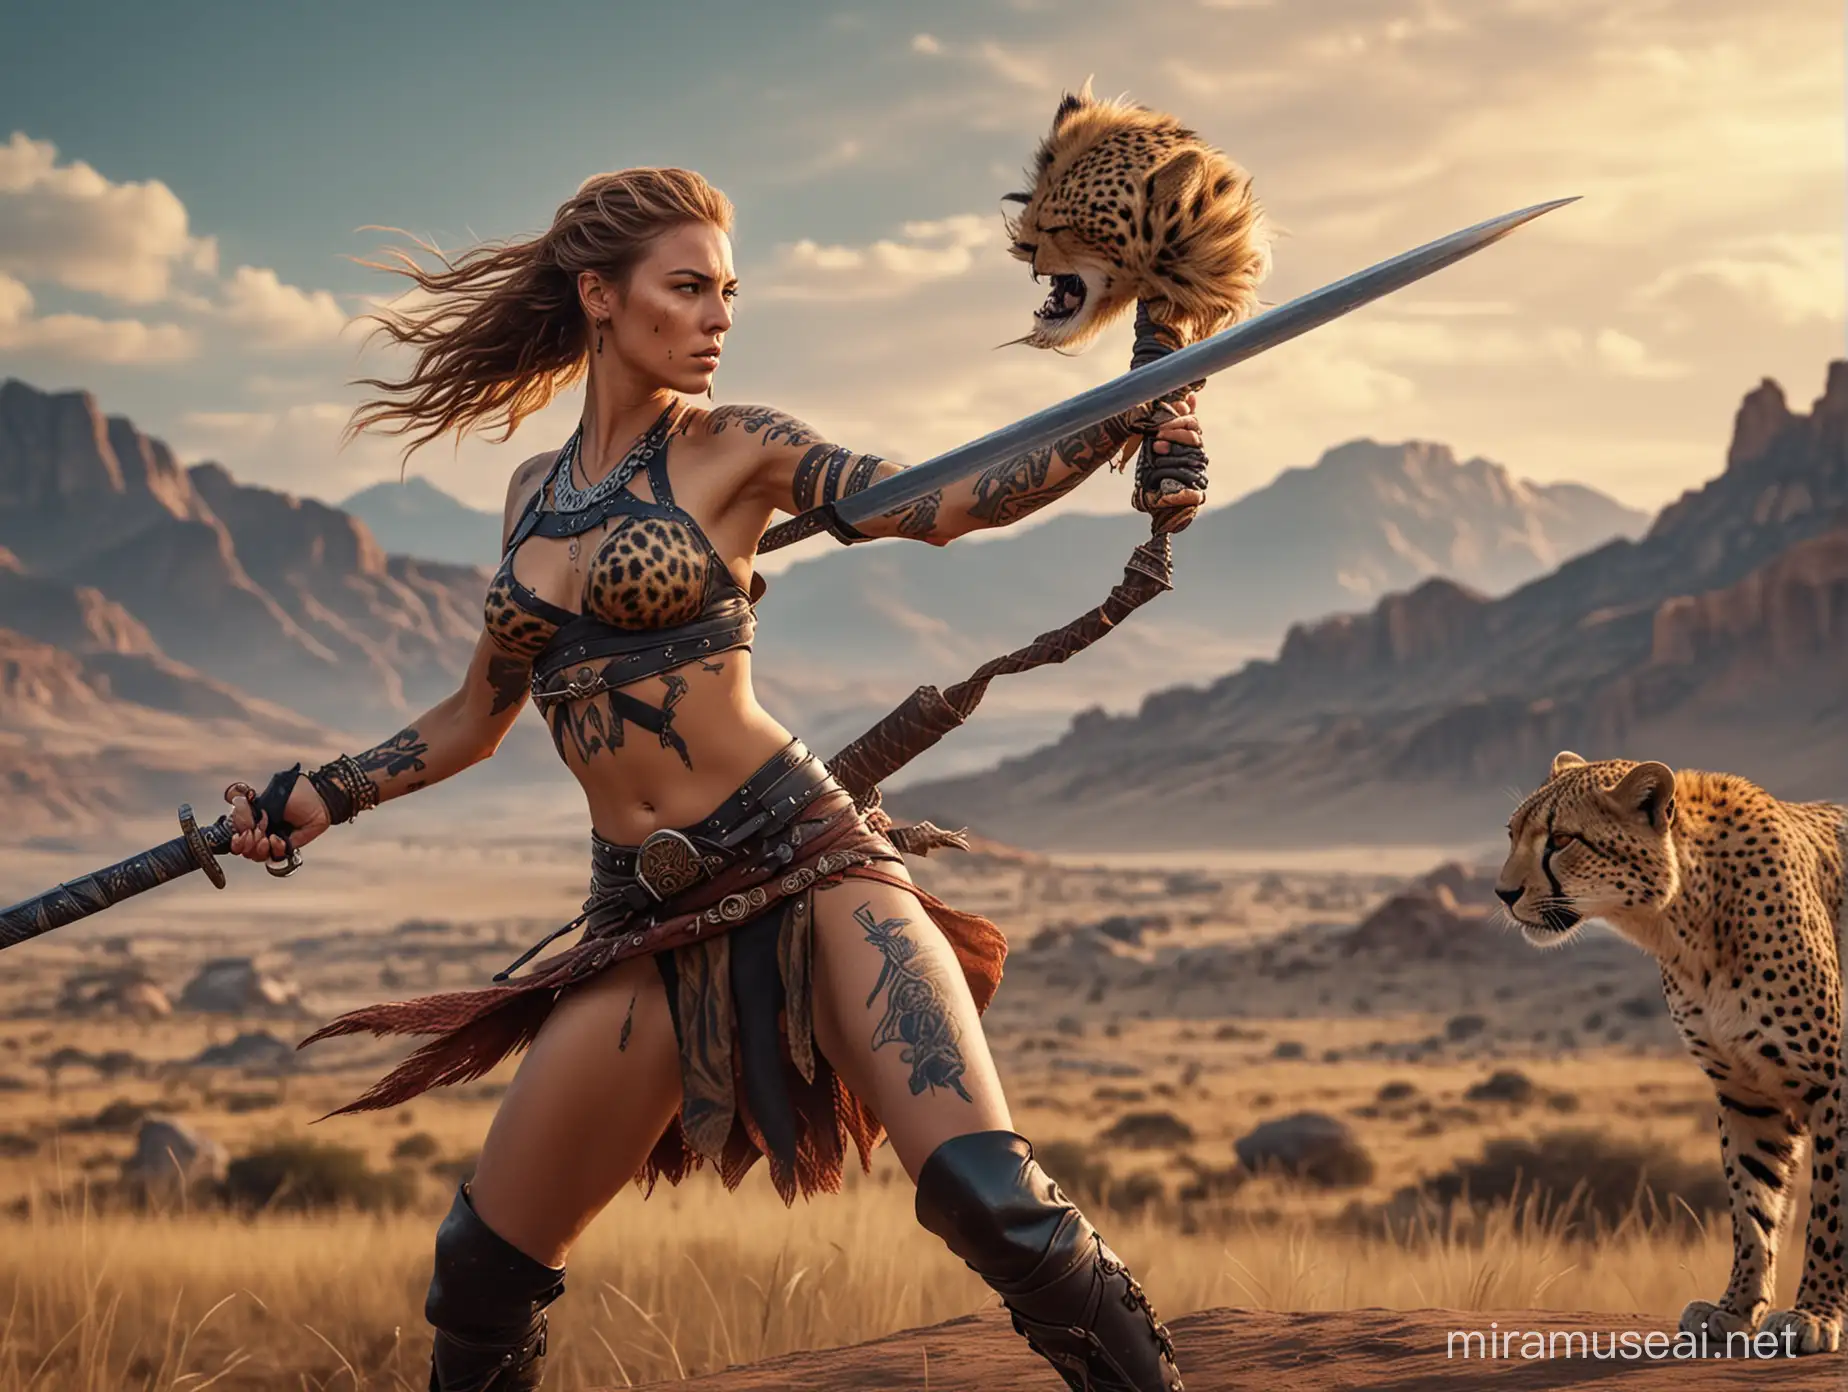 Cinematic Battle Warrior Caucasian Woman Fighting a Cheetah with Sword in Dramatic Landscape